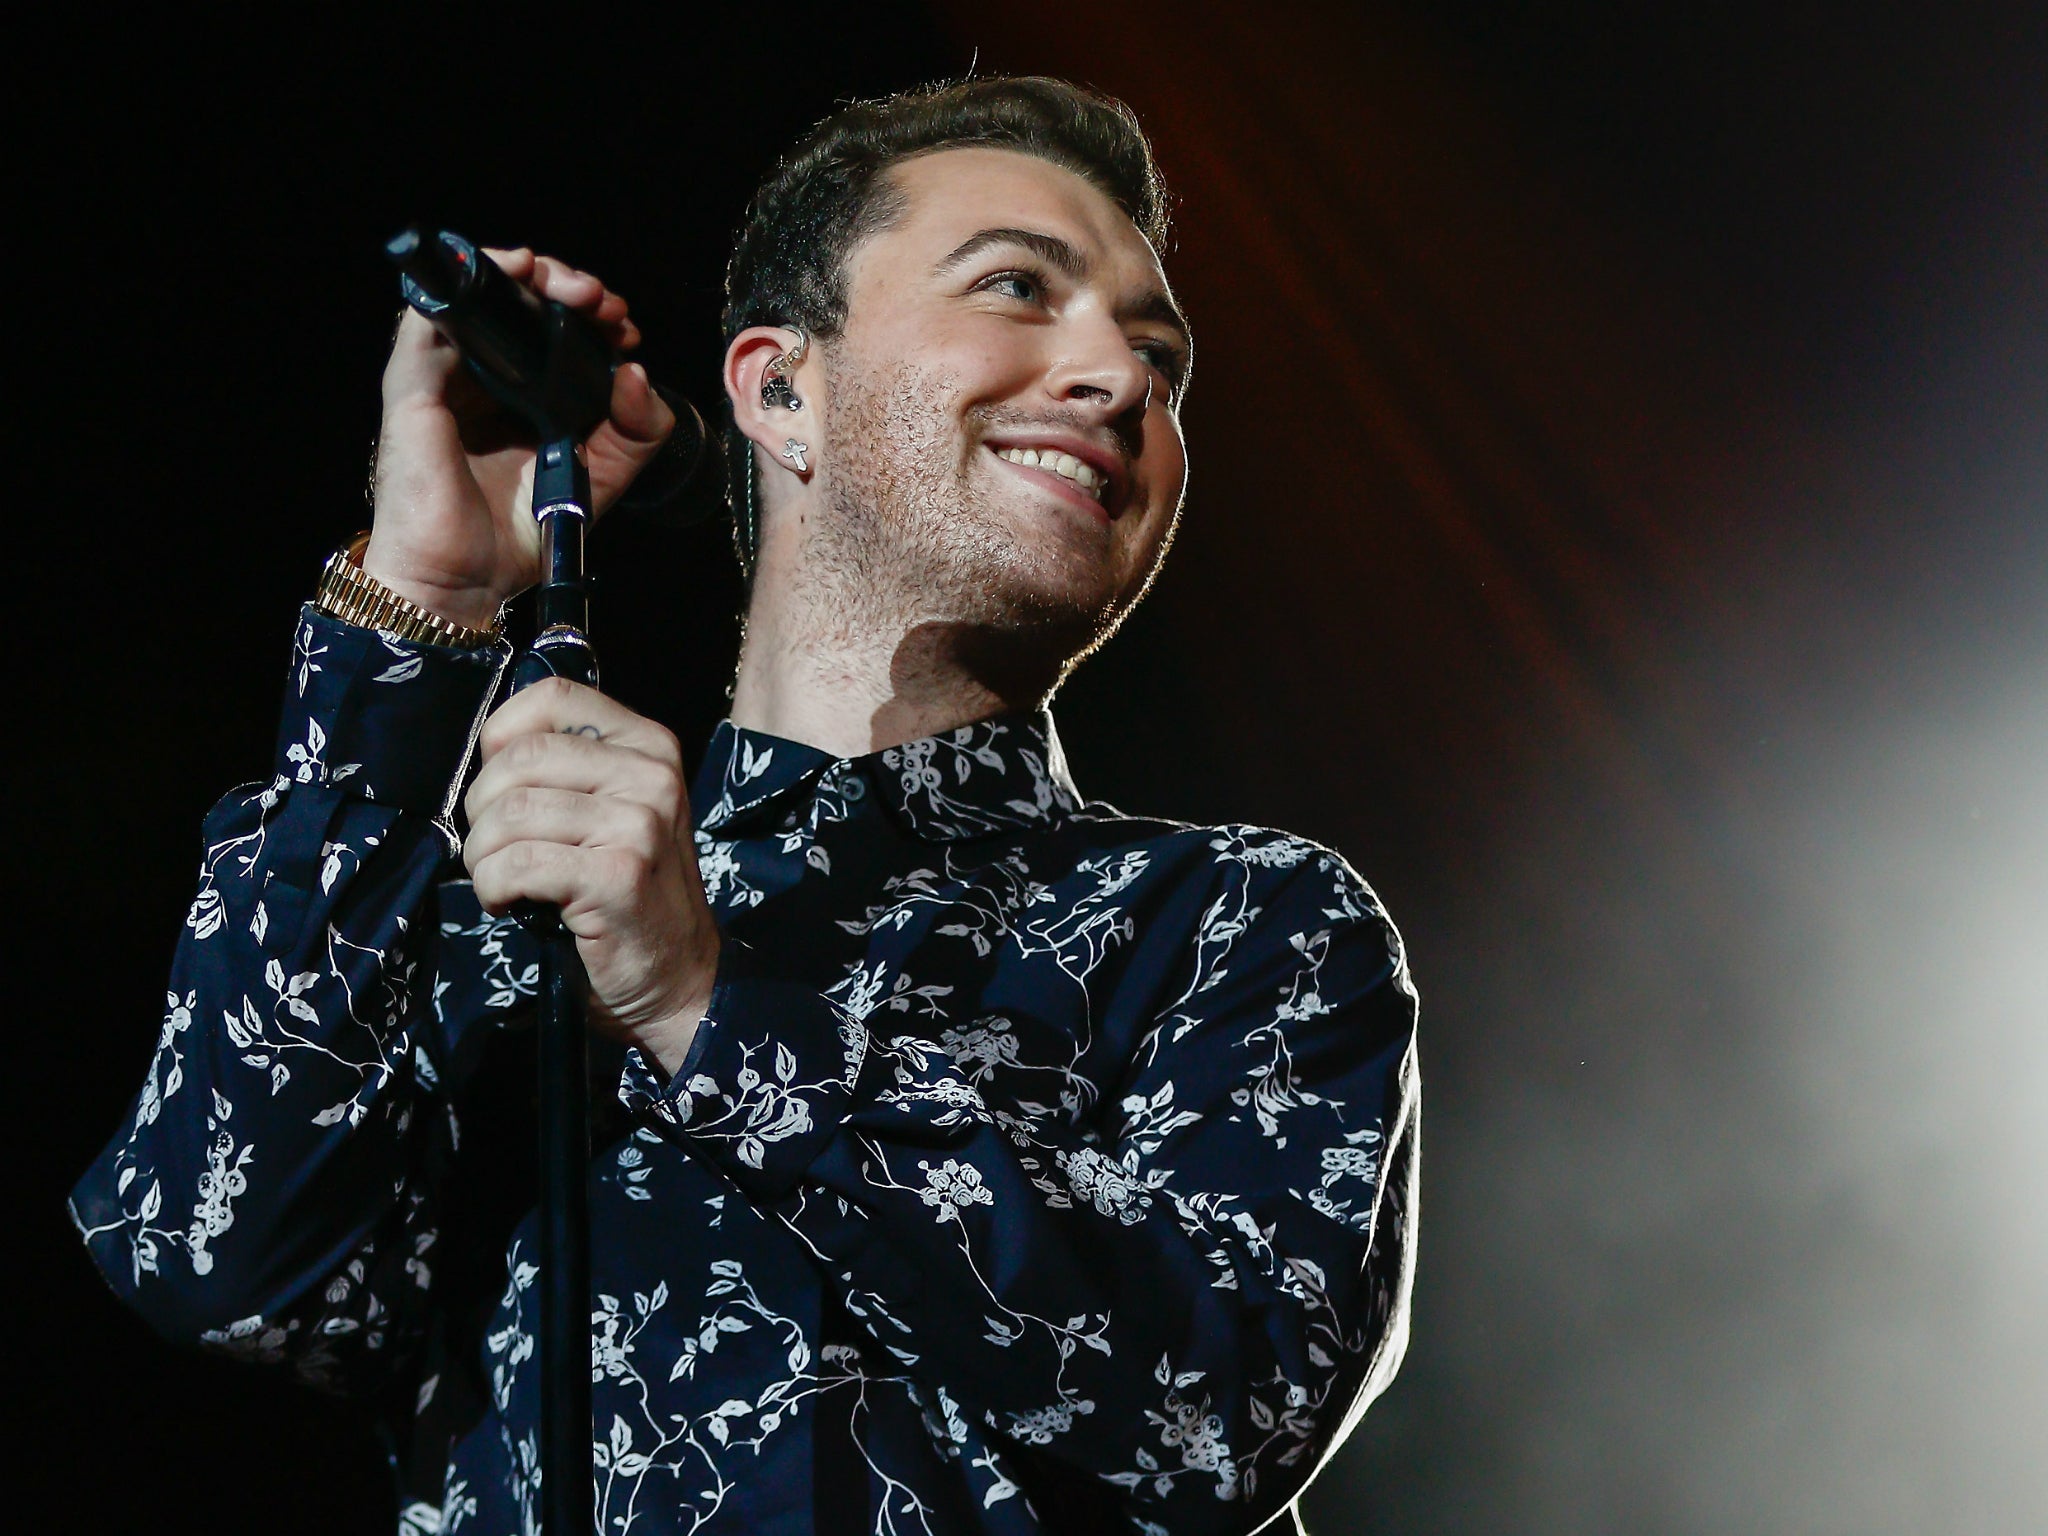 Sam Smith has co-written and will perform 'Writing's On the Wall' for new James Bond film Spectre